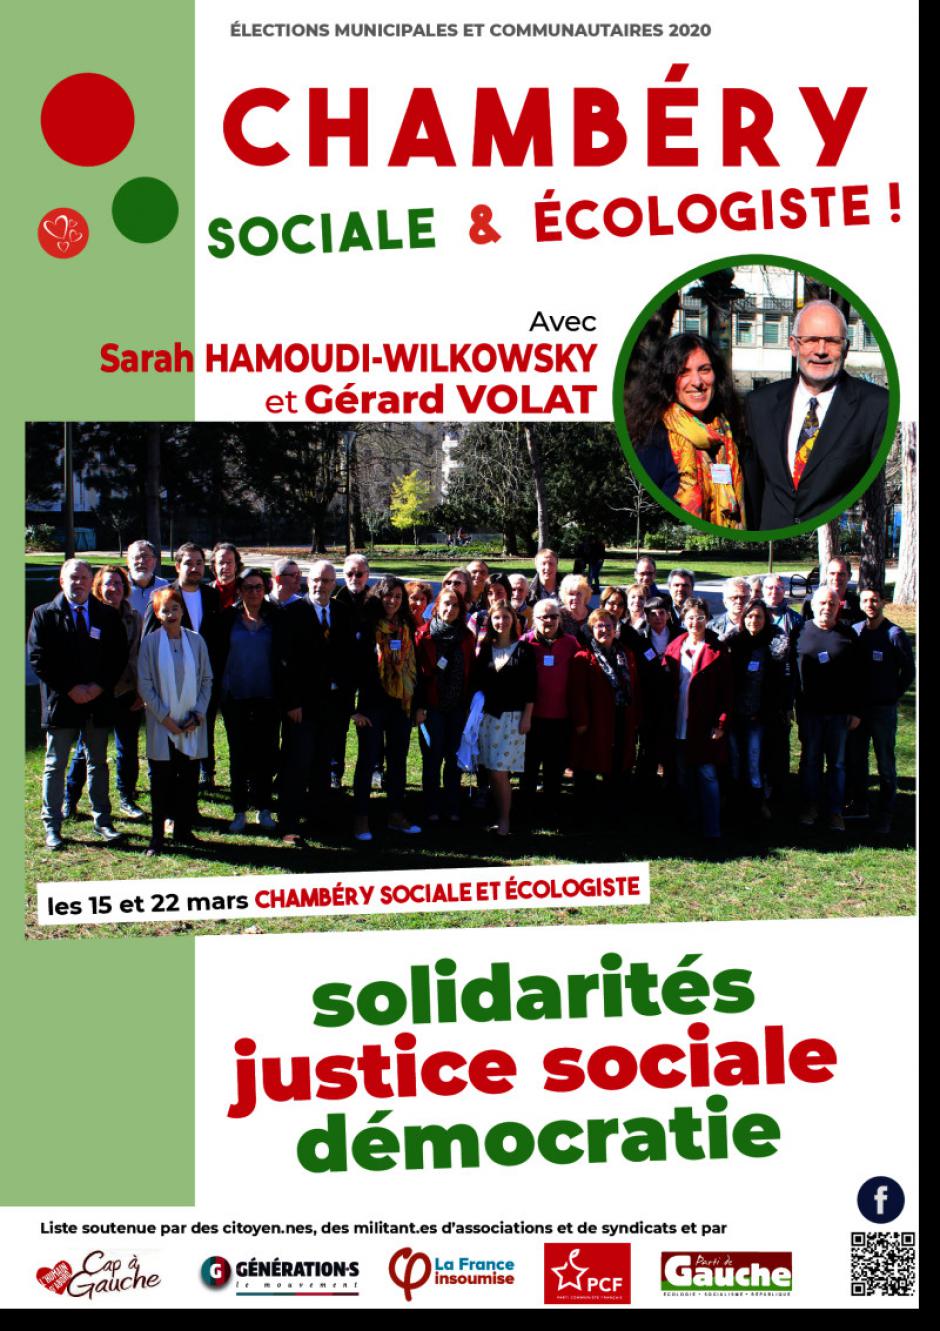 1. [Tract] L'affiche